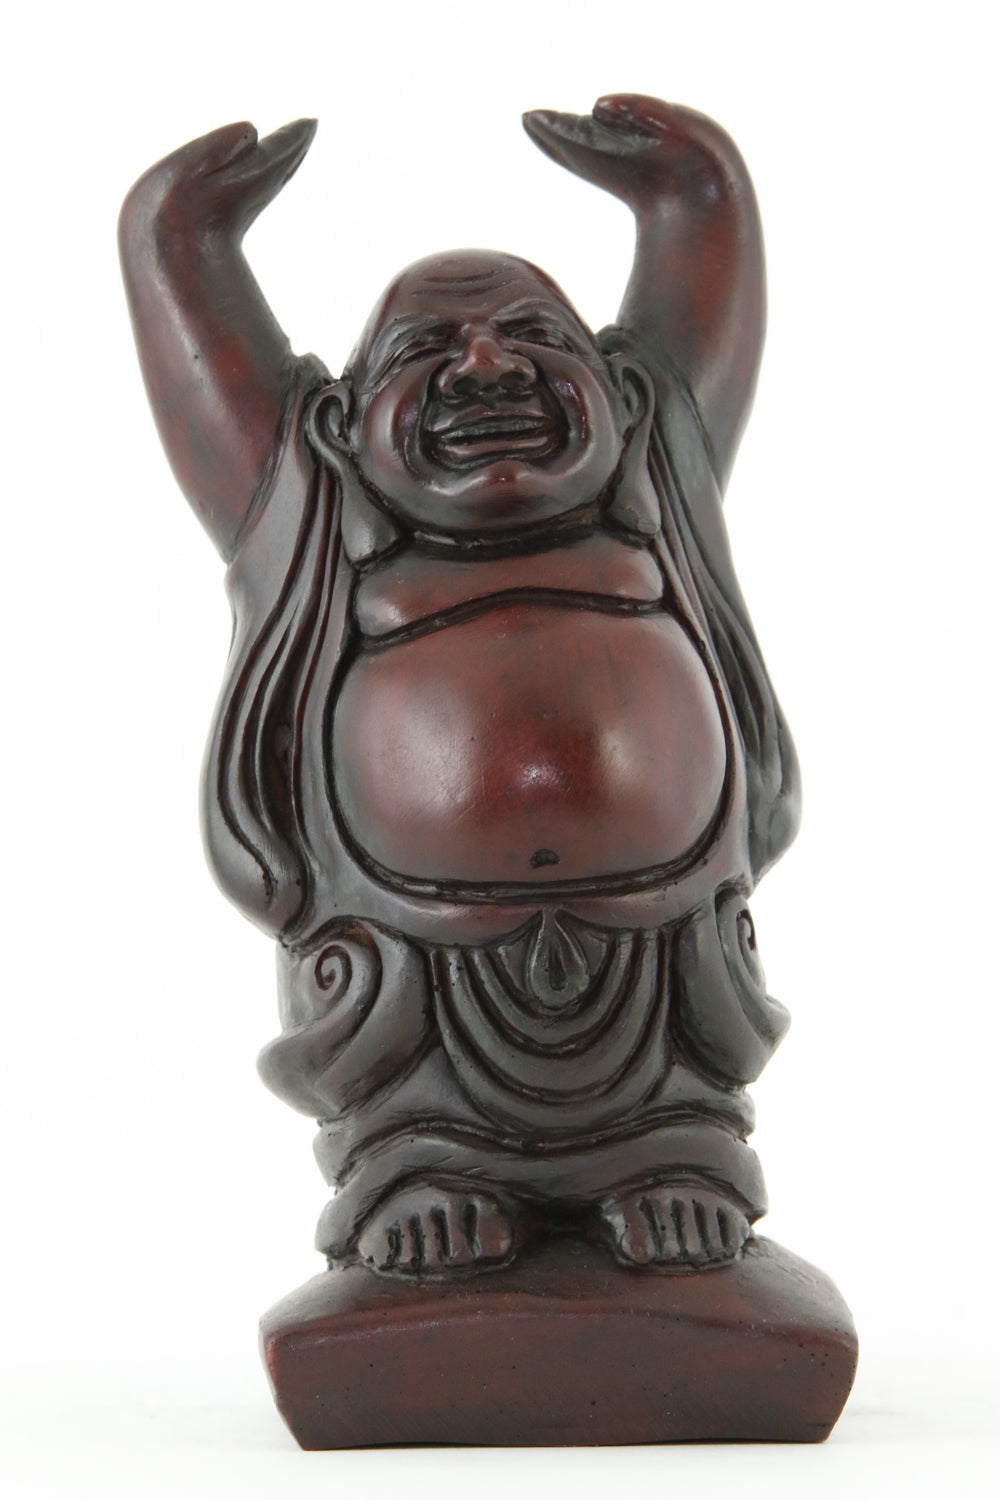 LAUGHING BUDDHA STATUE DARK LARGE SIZE FRONT VIEW